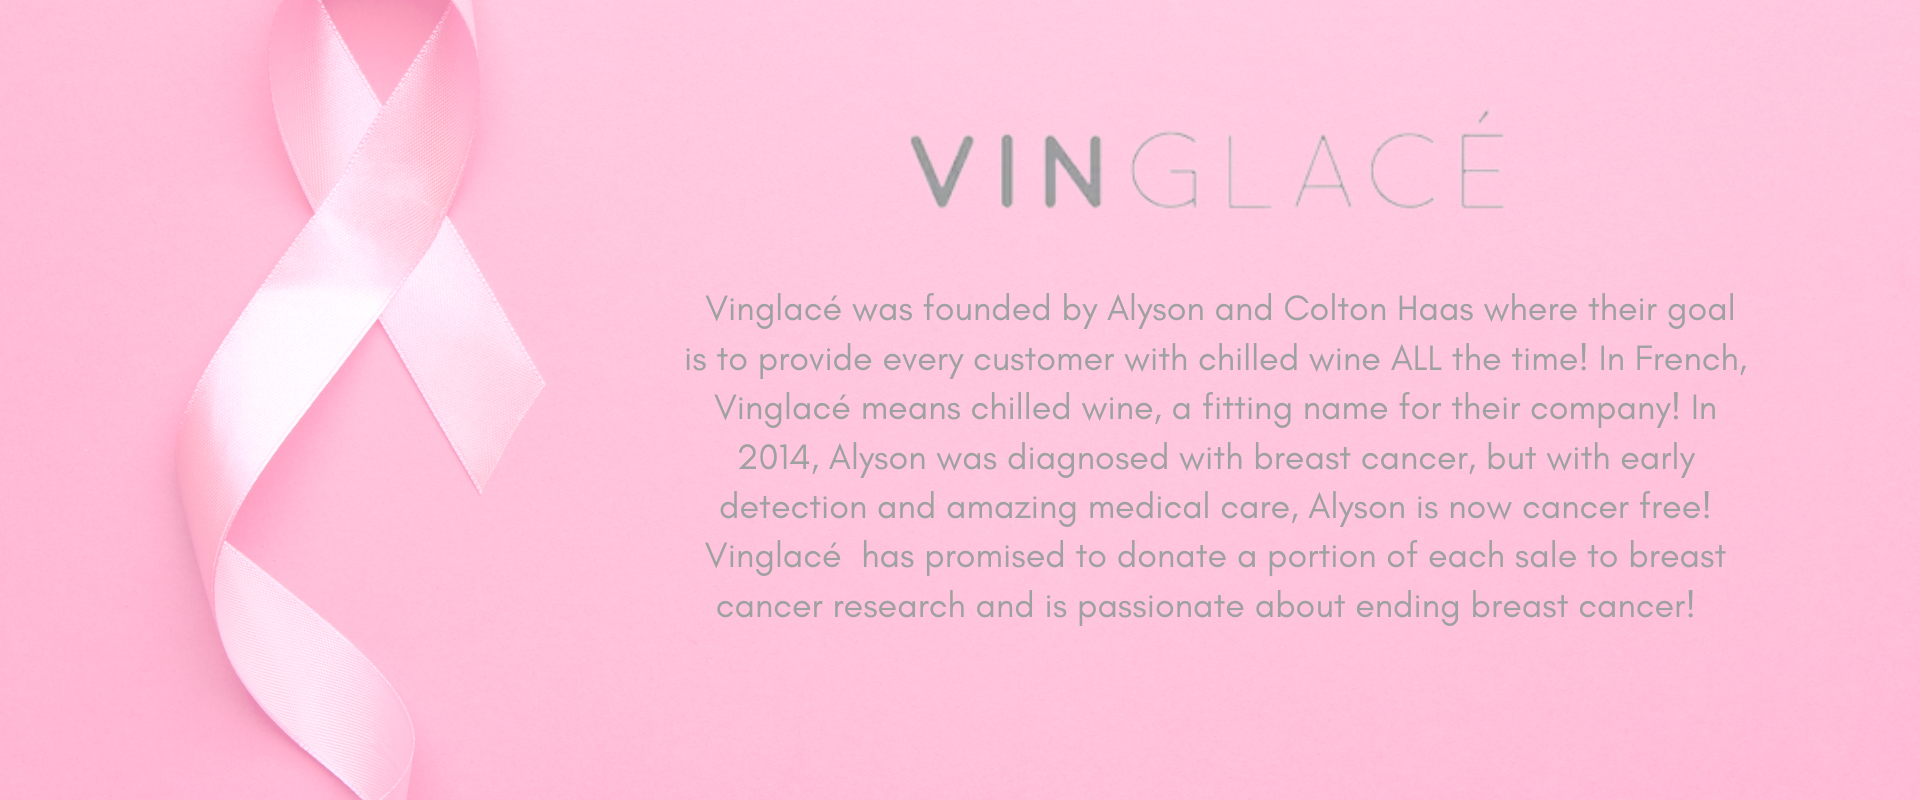 Vinglace description talking about breast cancer and how they are fighting against it